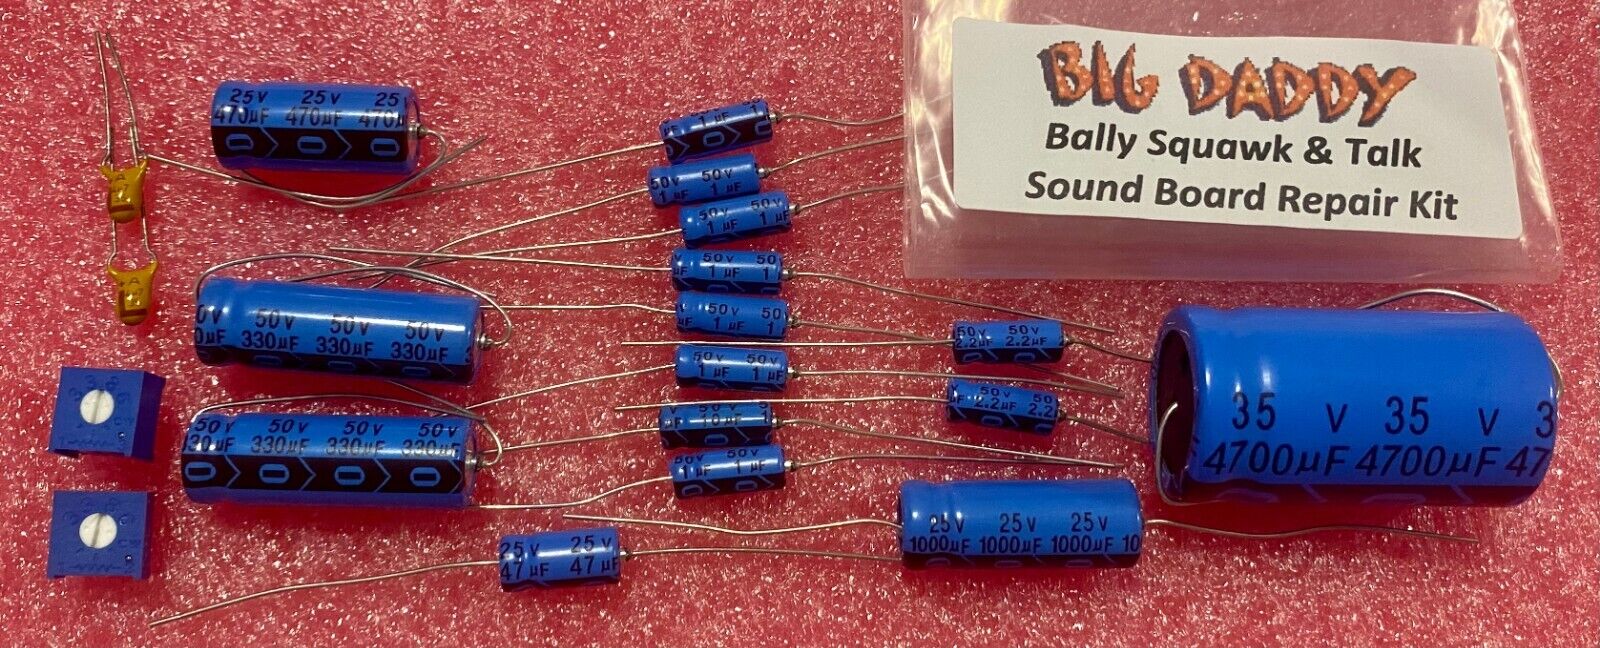 Squawk & Talk Sound Board Capacitor Repair Kit for Bally/Midway pinball machines